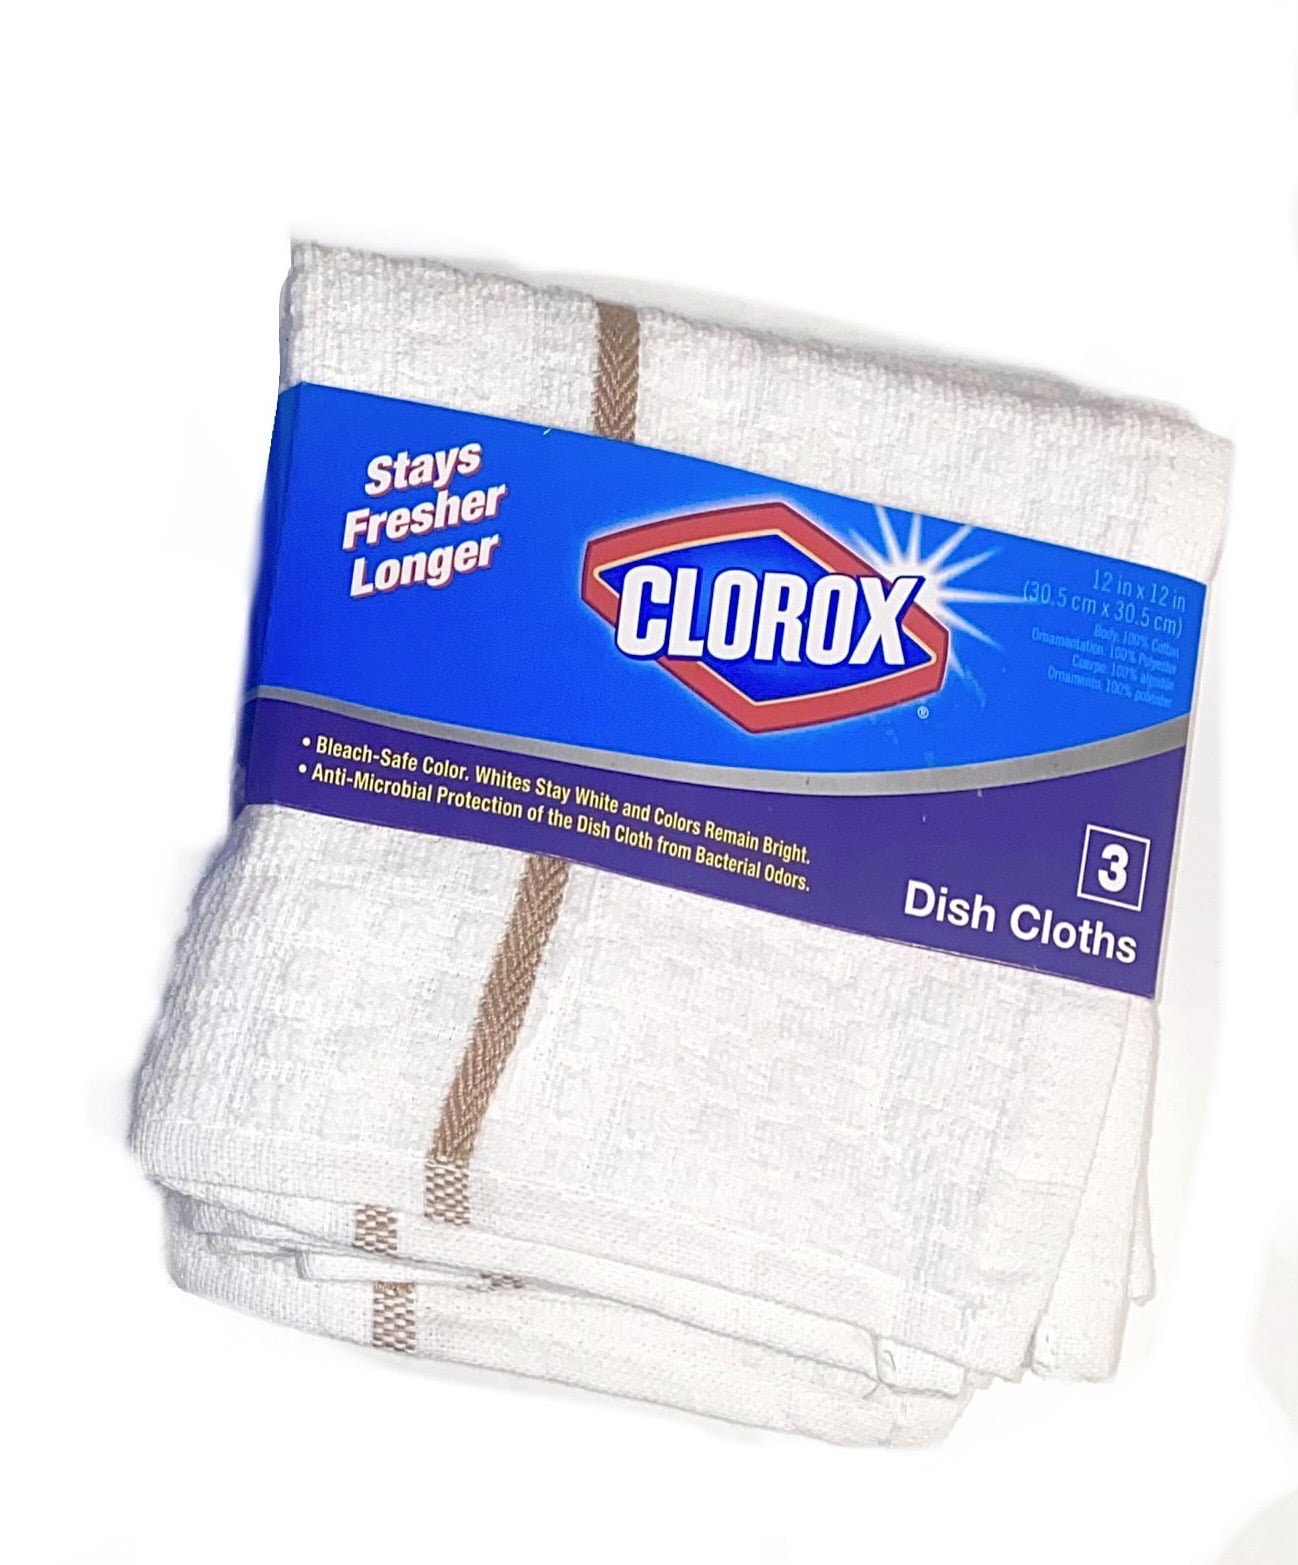 Clorox Dish Cloths - 6 Count (2 Packs of 3 Cloths), White with Grey Stripe